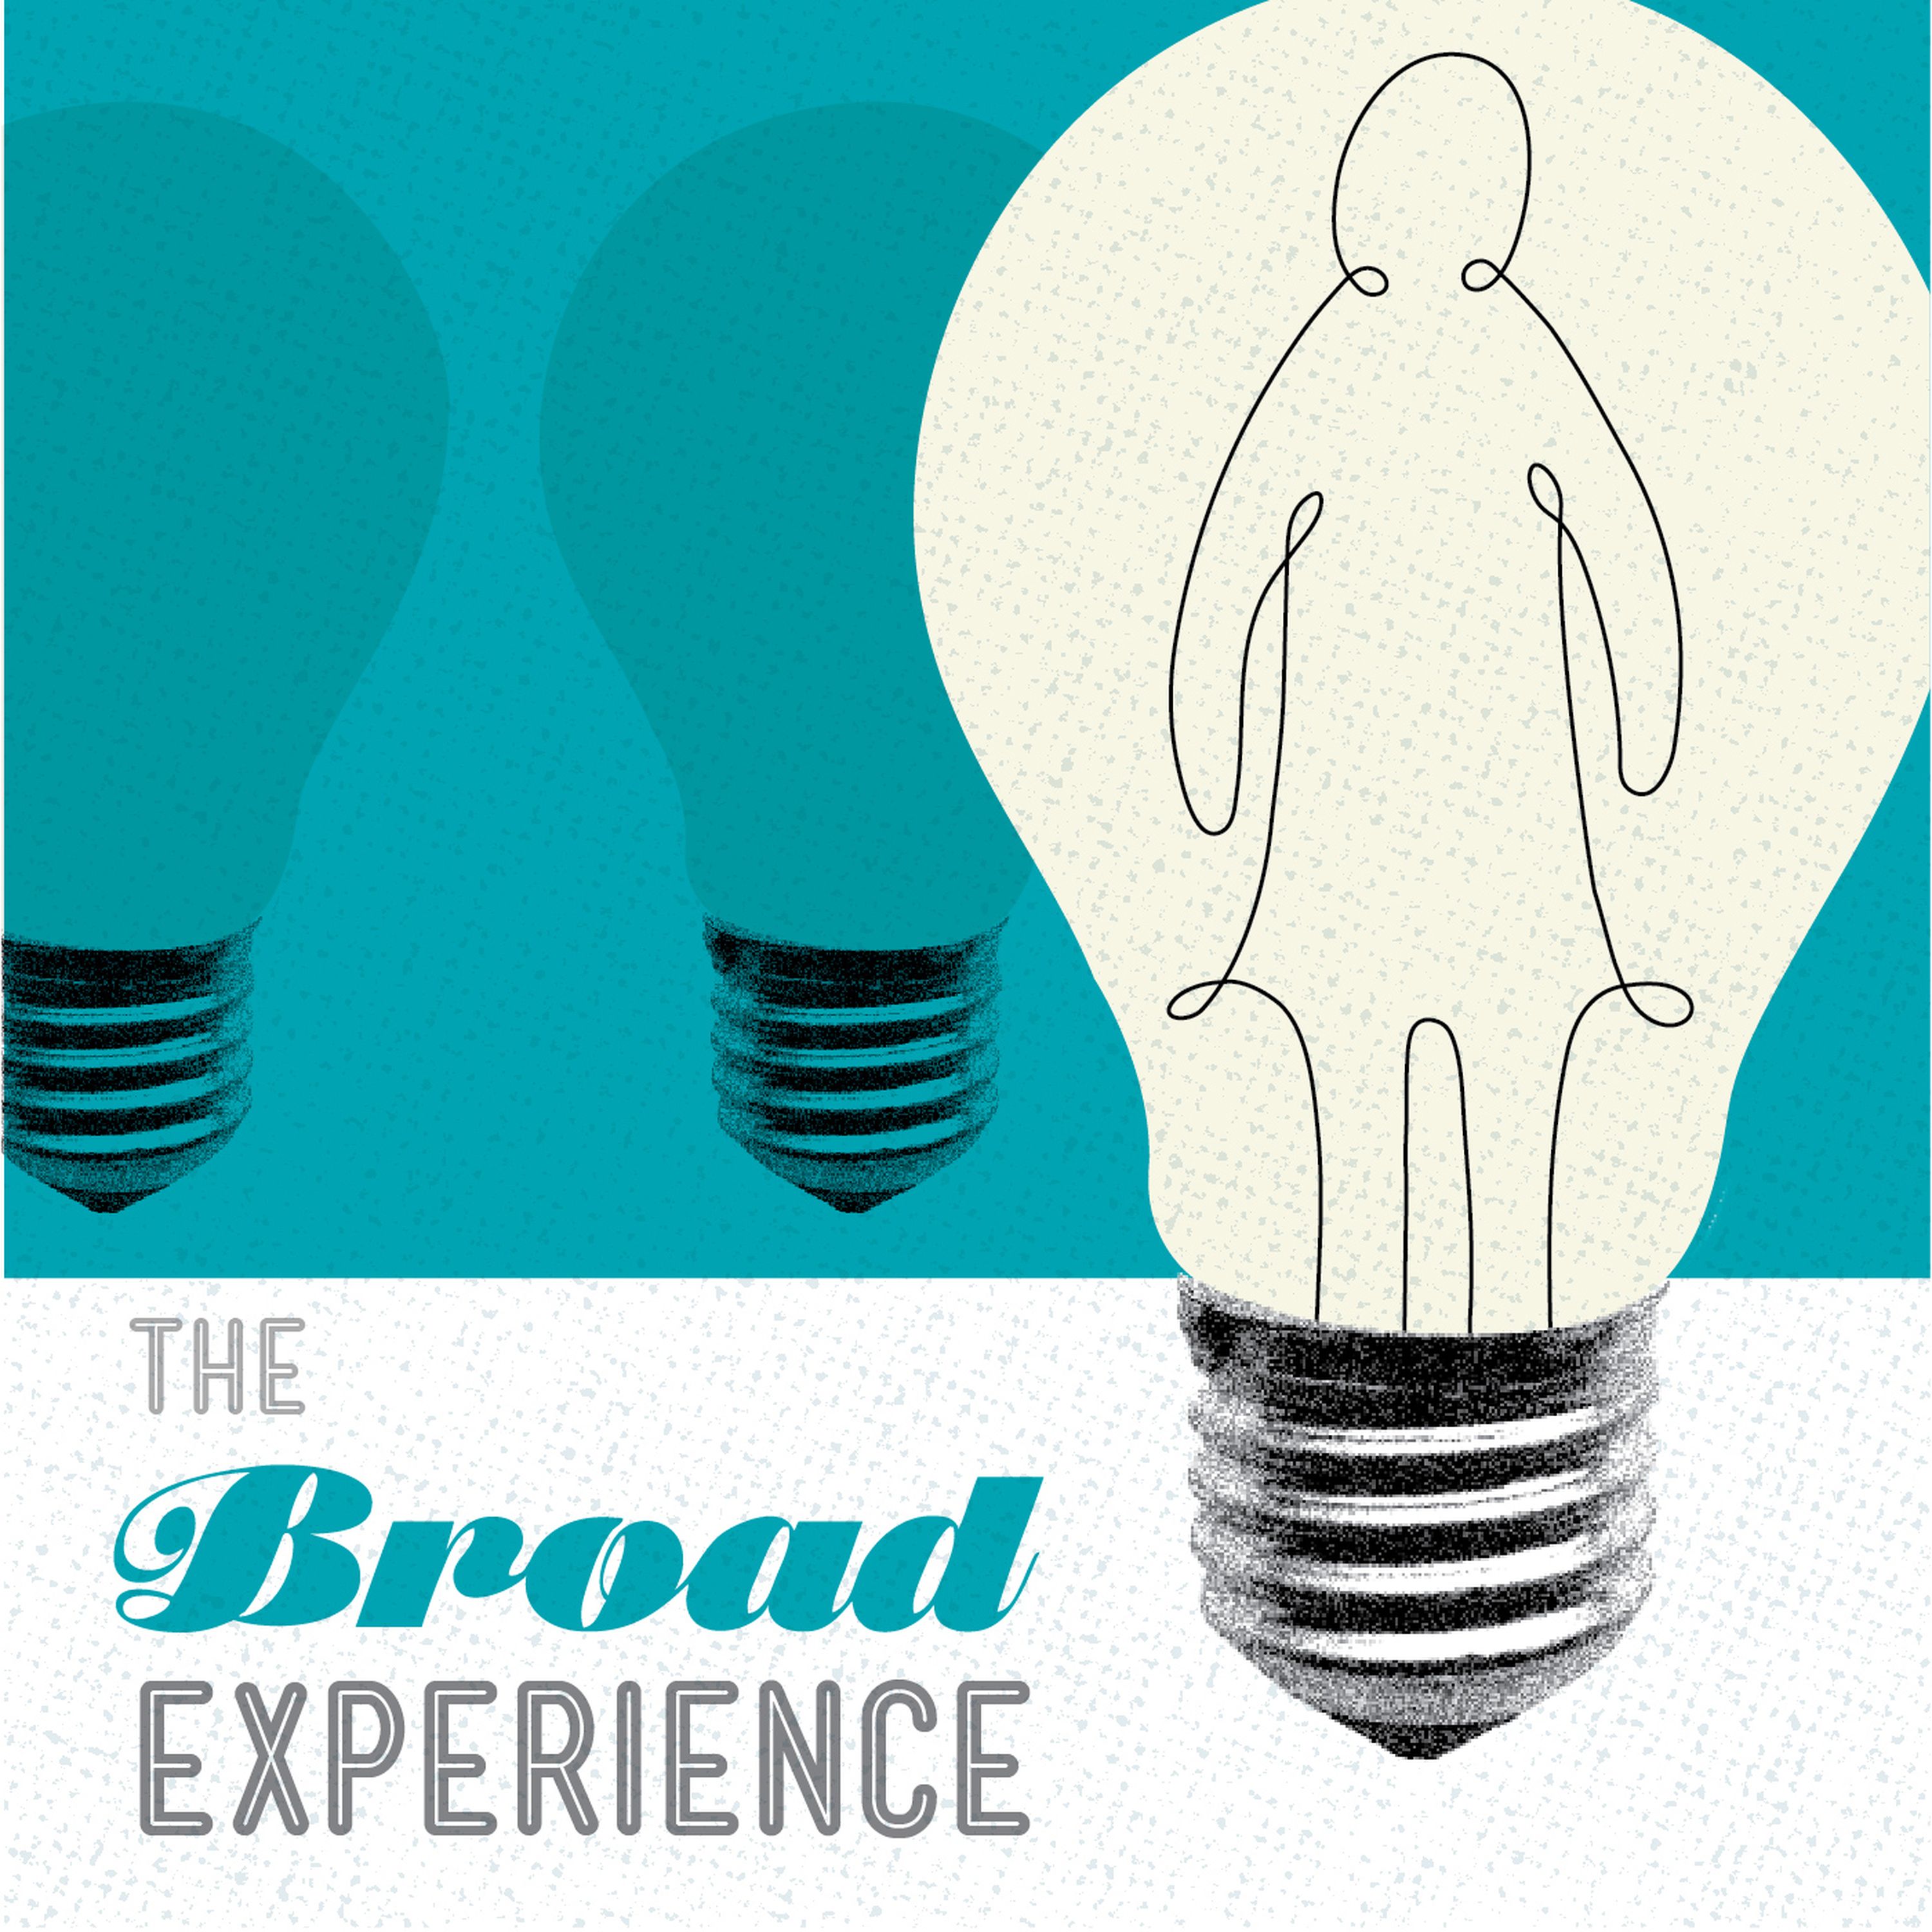 The Broad Experience 44: The motherhood factor